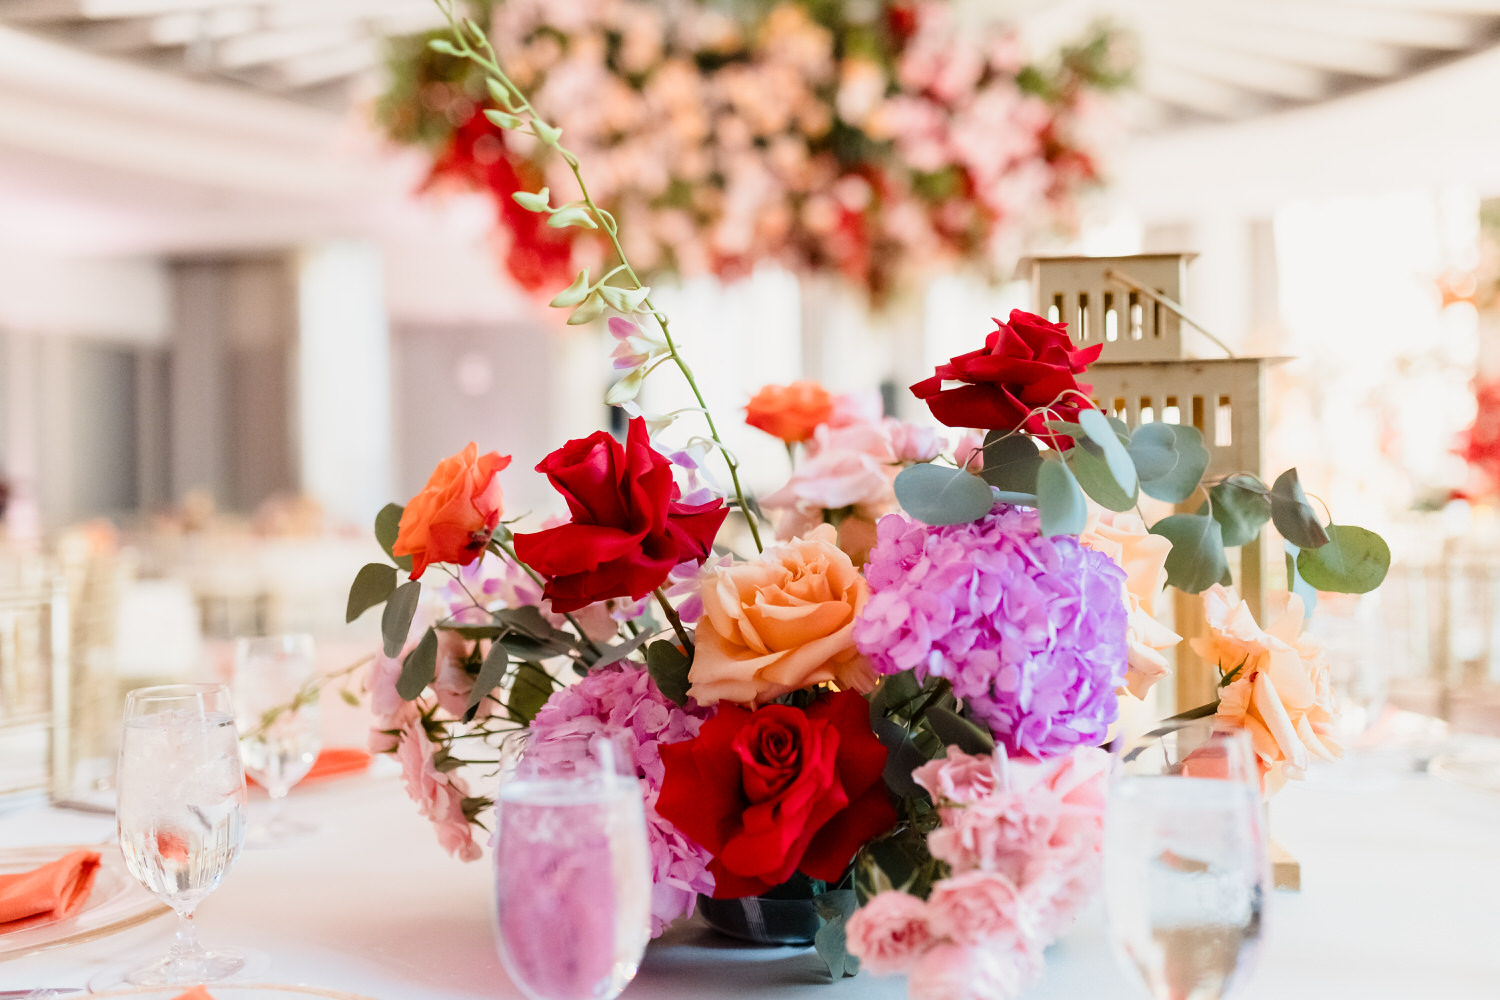 A colorful floral arrangement on a table at a wedding reception.